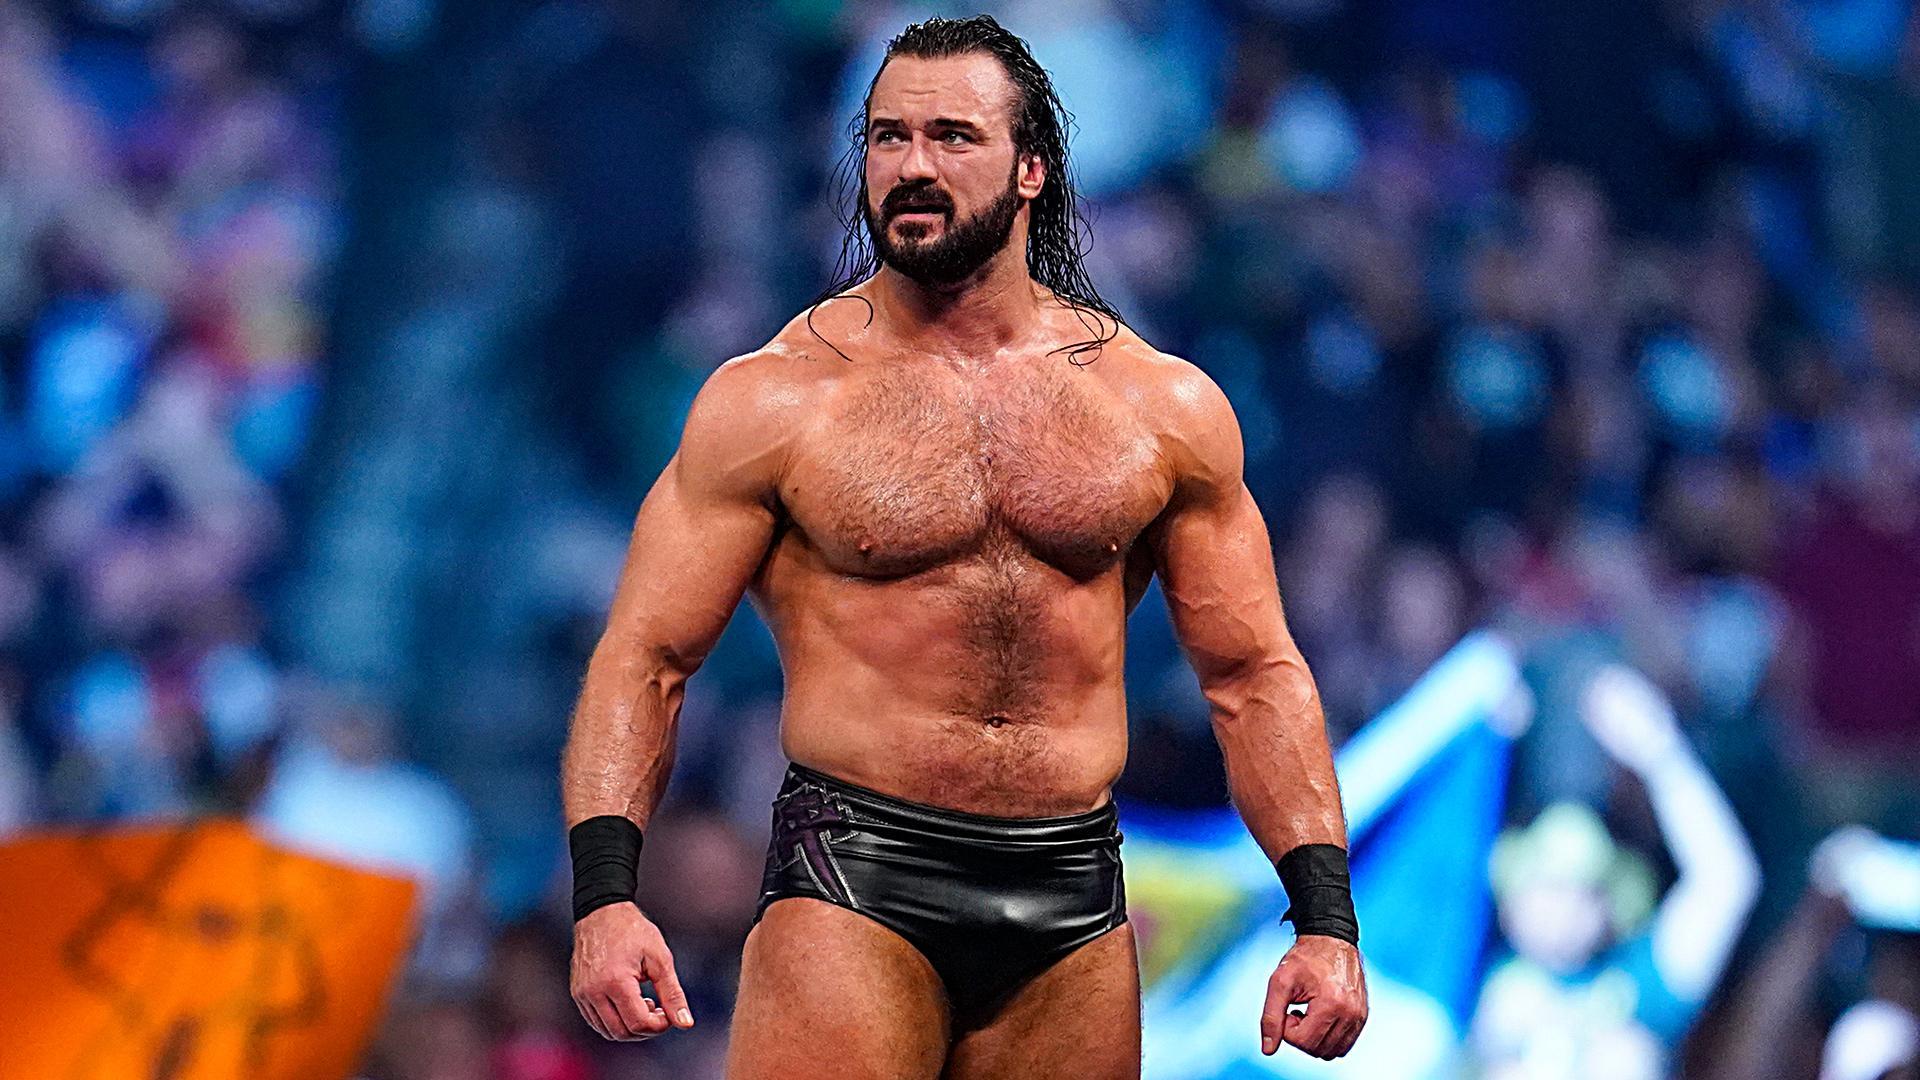 Who Drew McIntyre Wants To Face At WWE SummerSlam